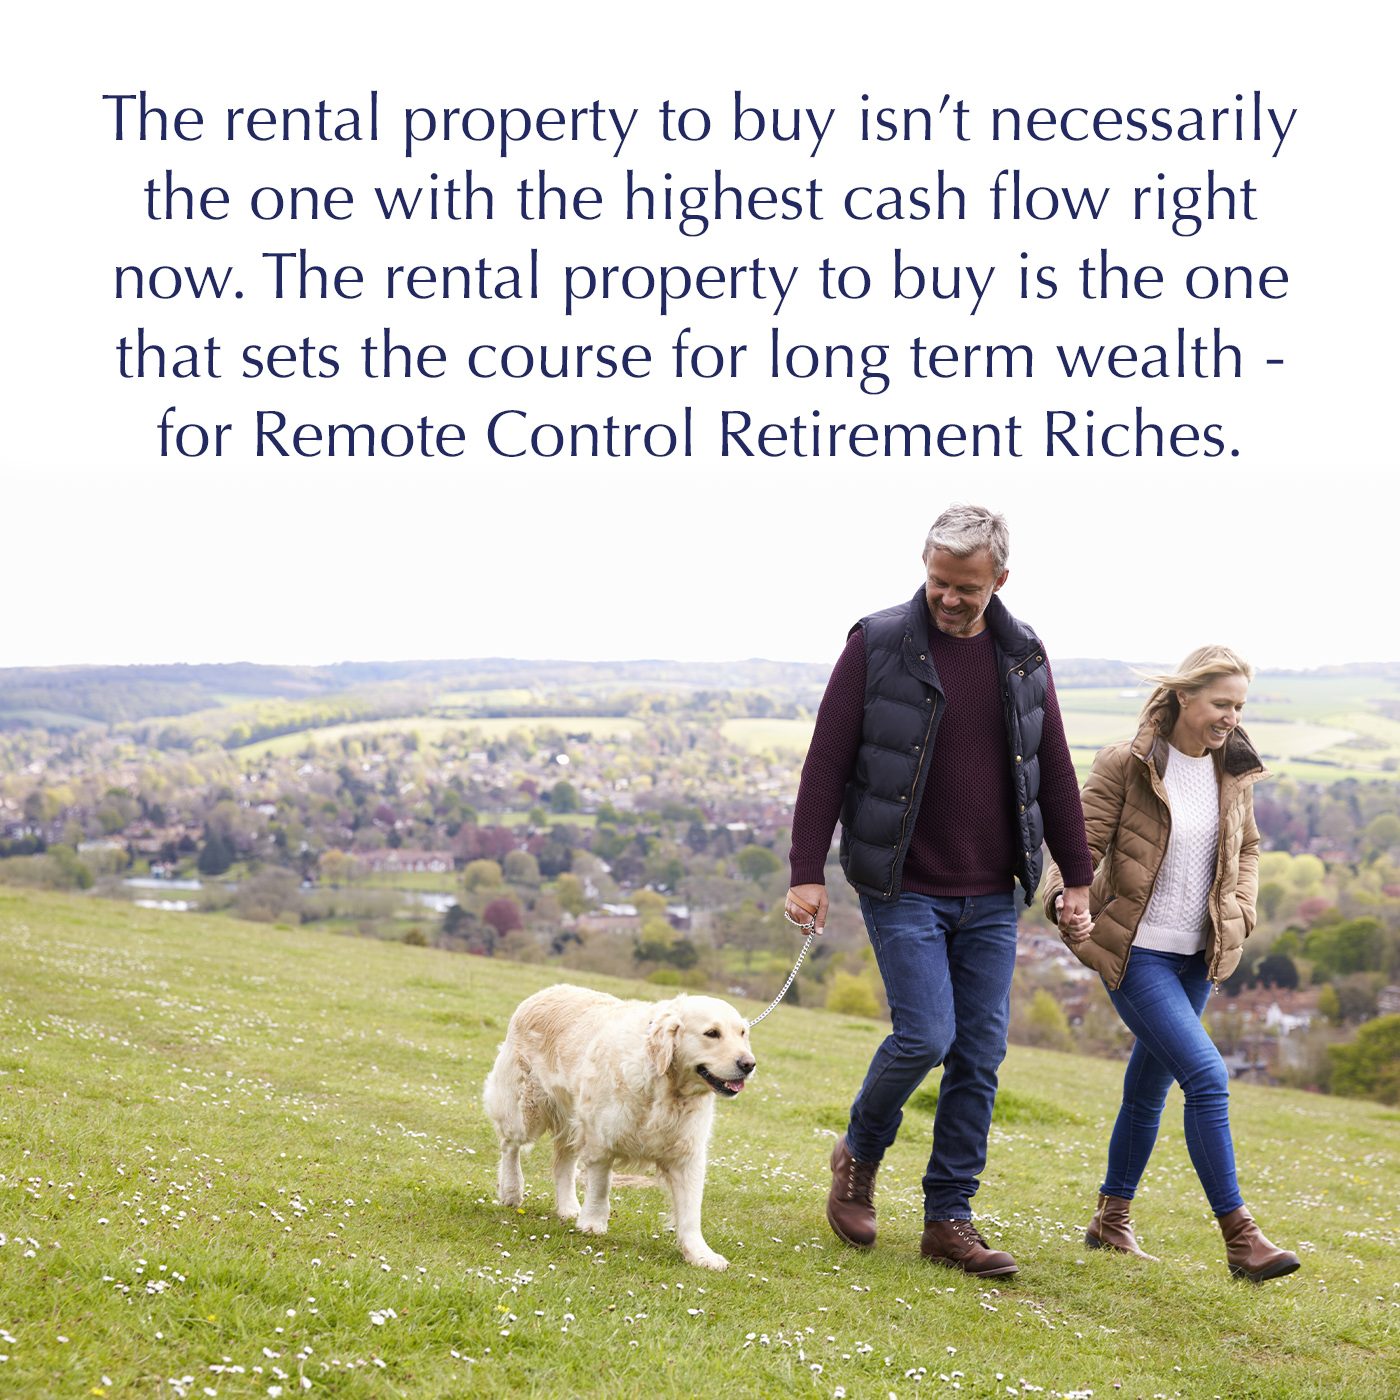 20 - 50-year-olds are clamoring for a rental property to buy: Event Launch